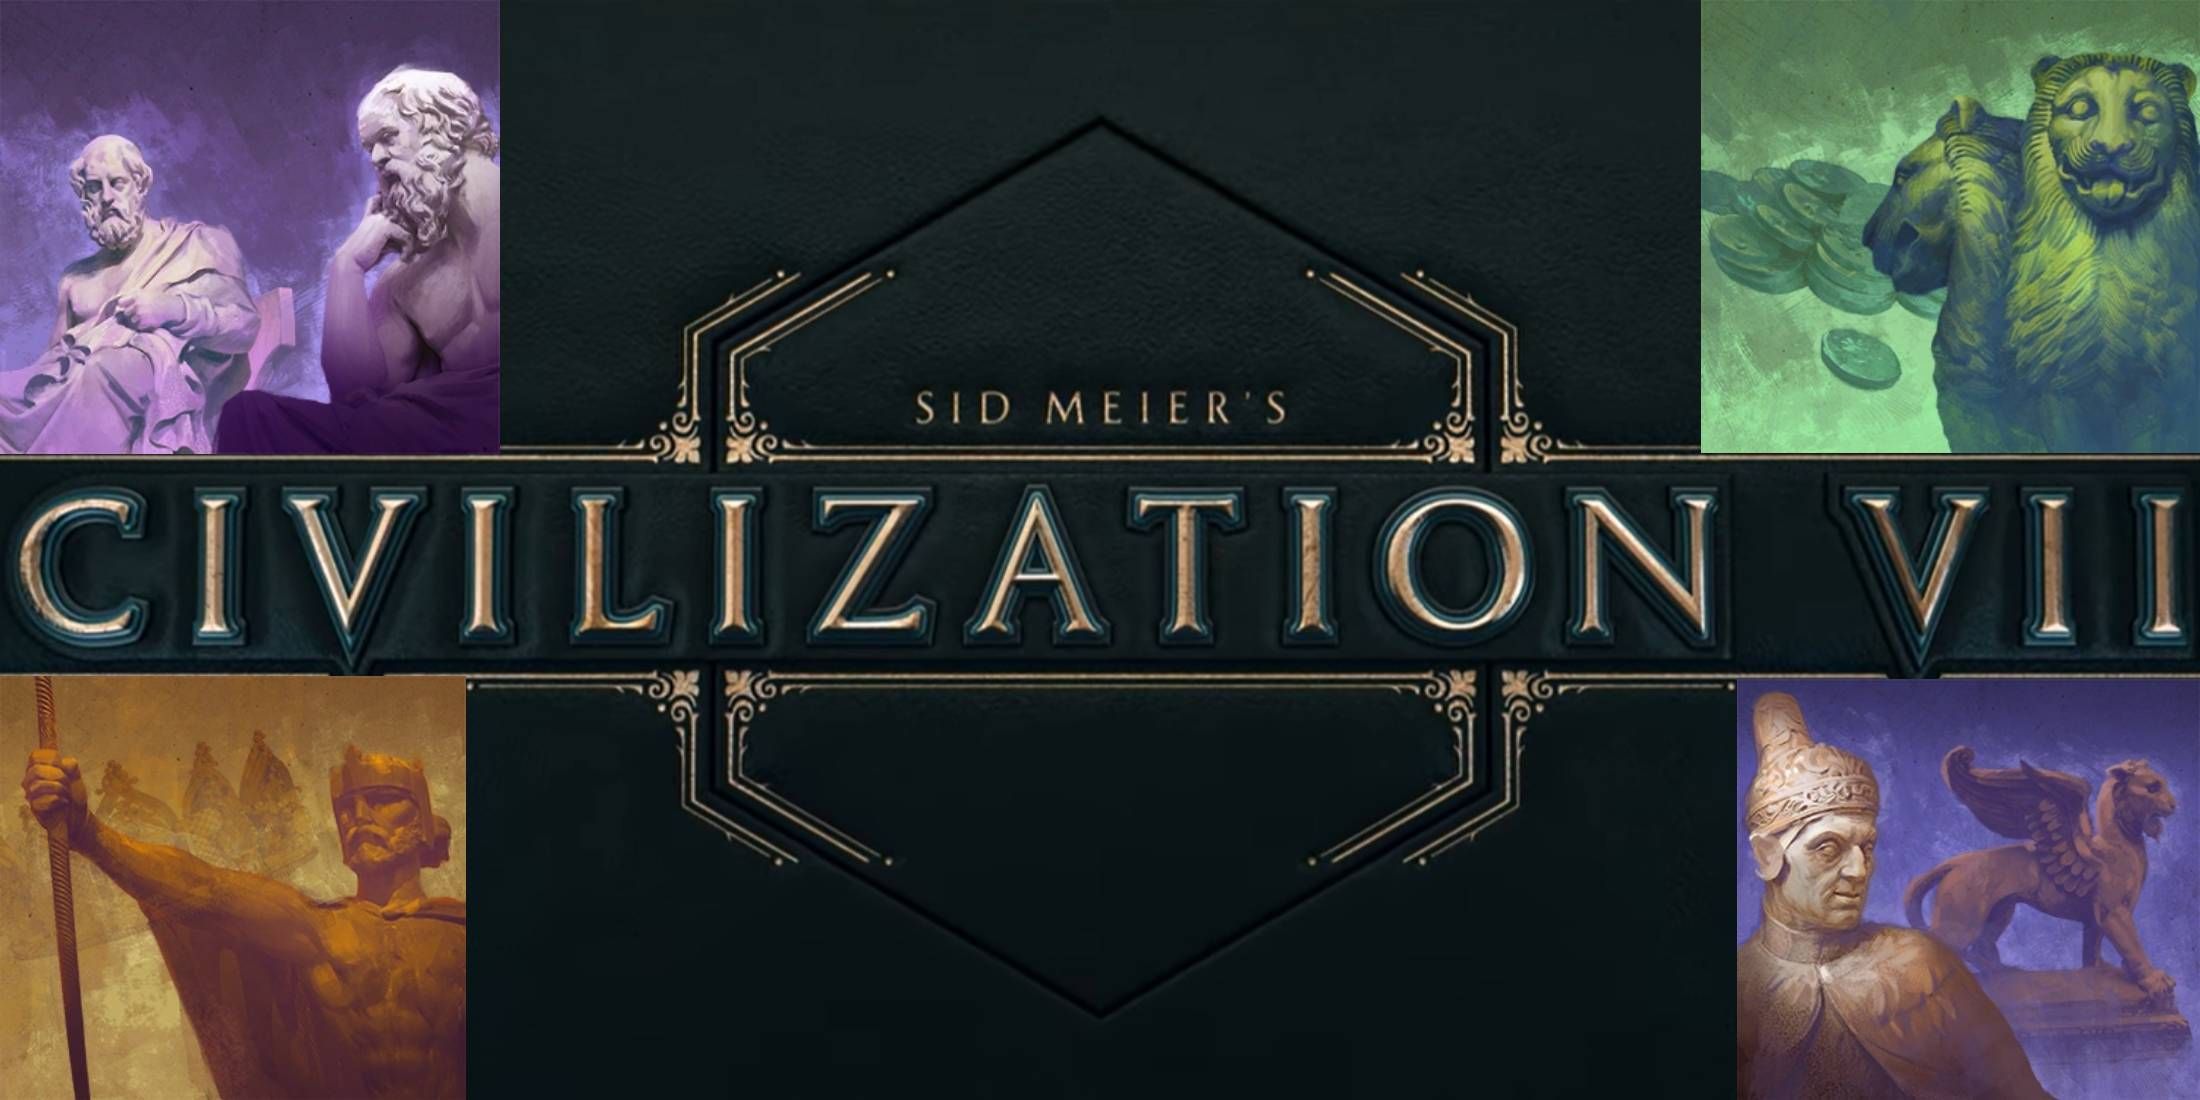 Civilization 7 logo surrounded by Classical Republic, Oligarchy, Monarchy, and Merchant Republic from Civilization 6